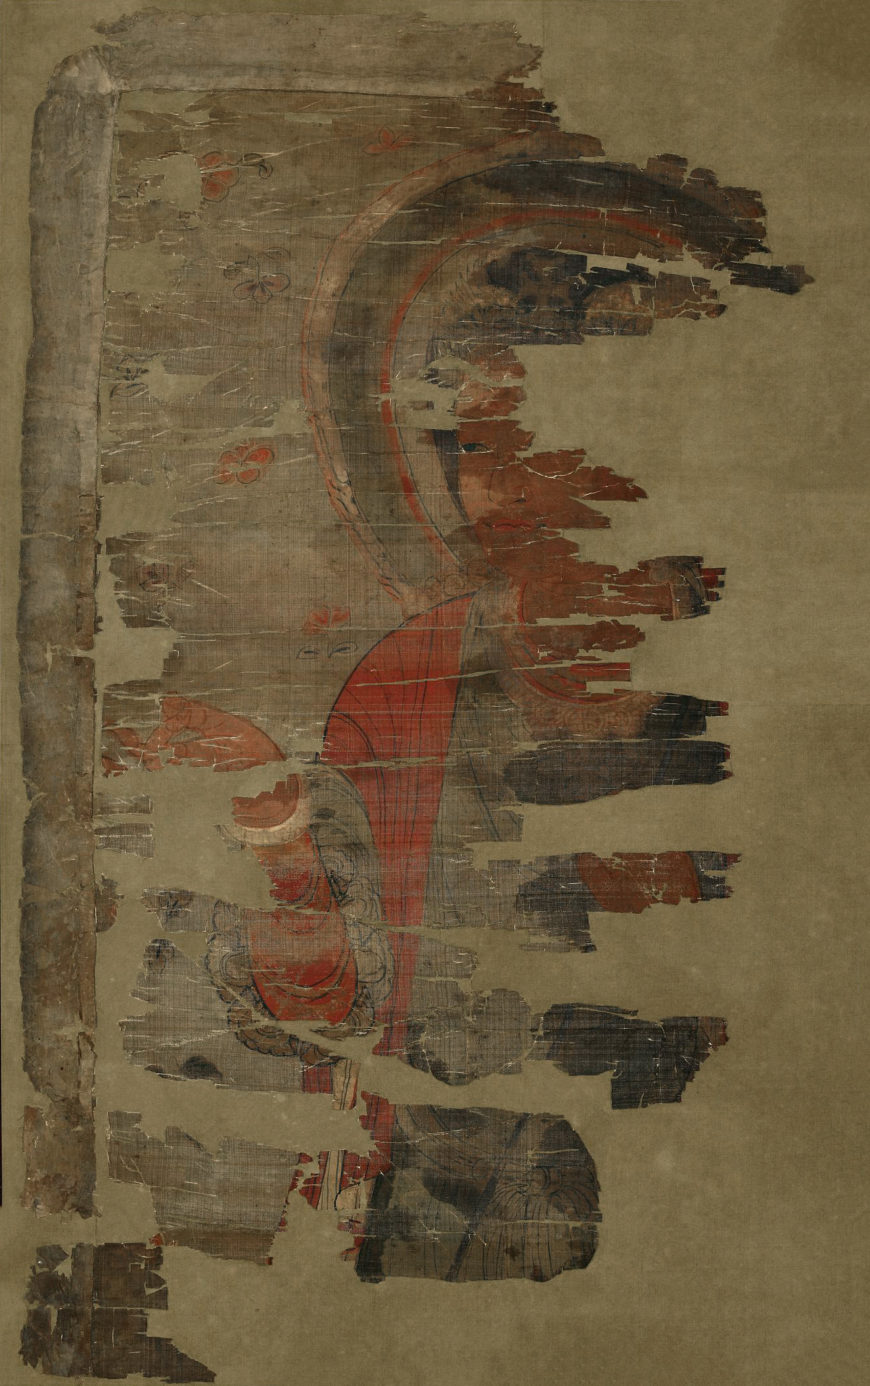 Jesus or a Christian Saint from Dunhuang (Mogao Caves: Cave 17), 9th century, paint on silk, 88 x 55 cm. (The British Museum)